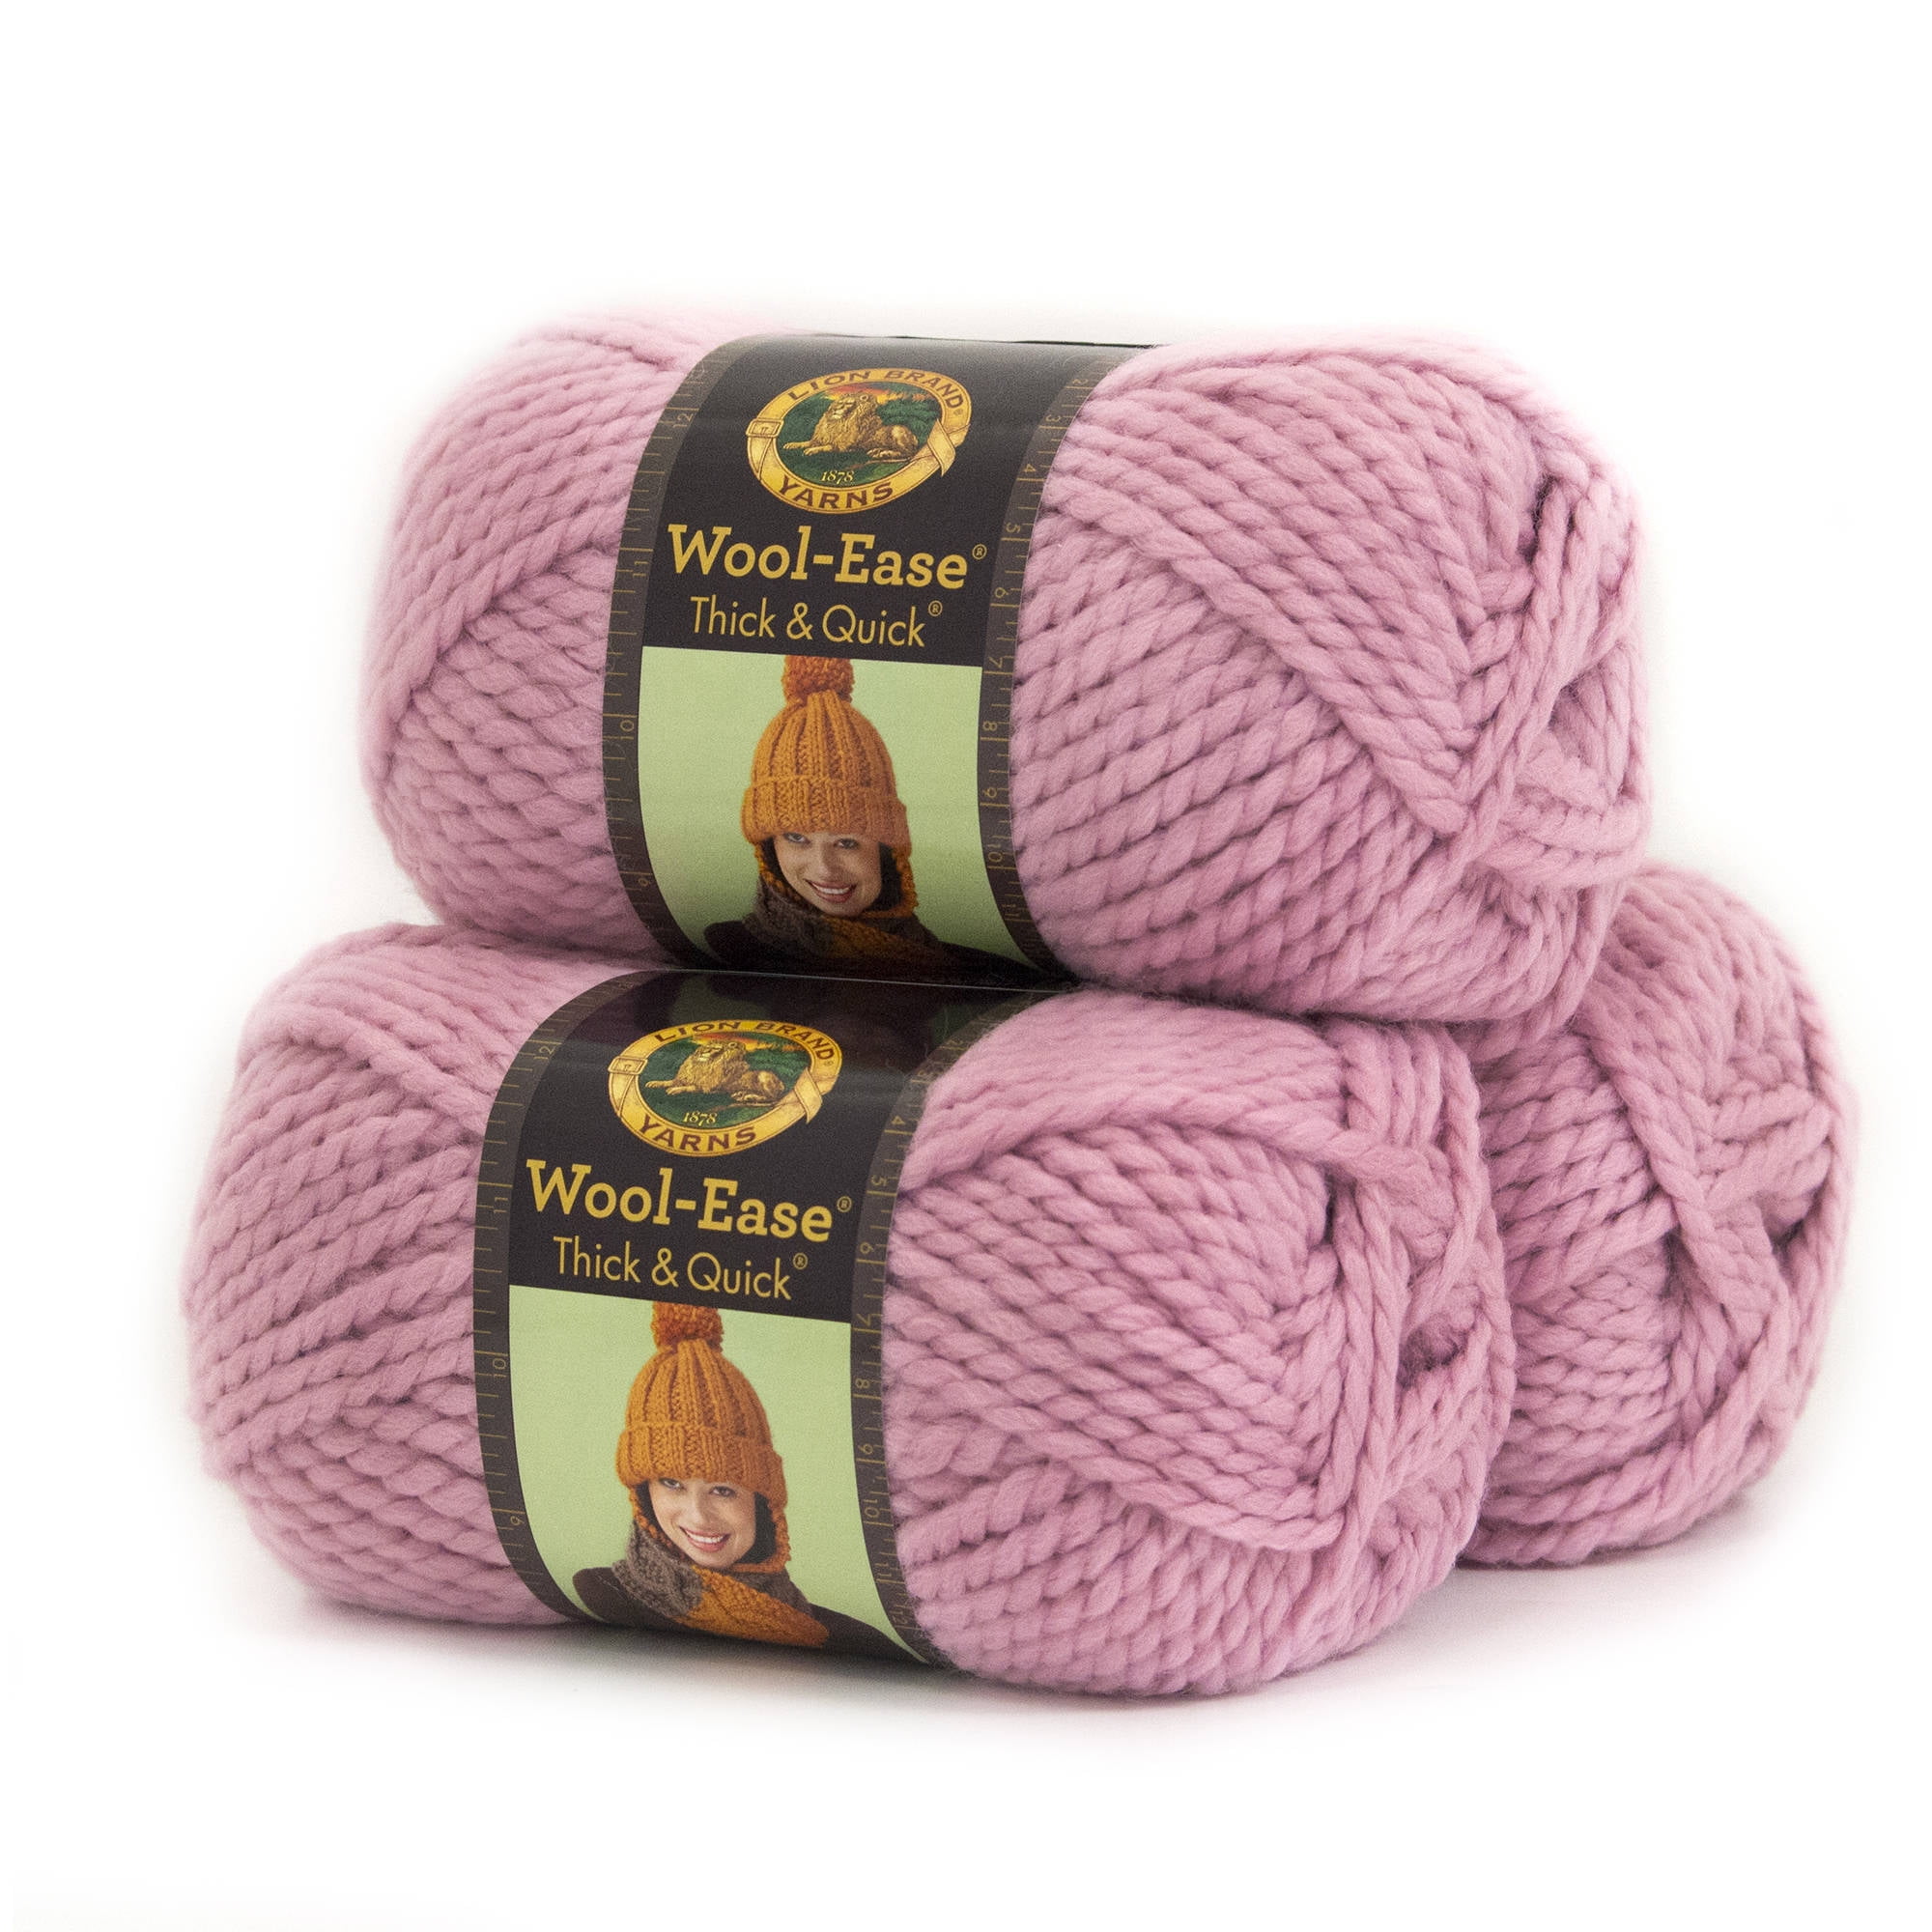 Lion Brand Yarn Wool-Ease Thick and Quick River Run Classic Super